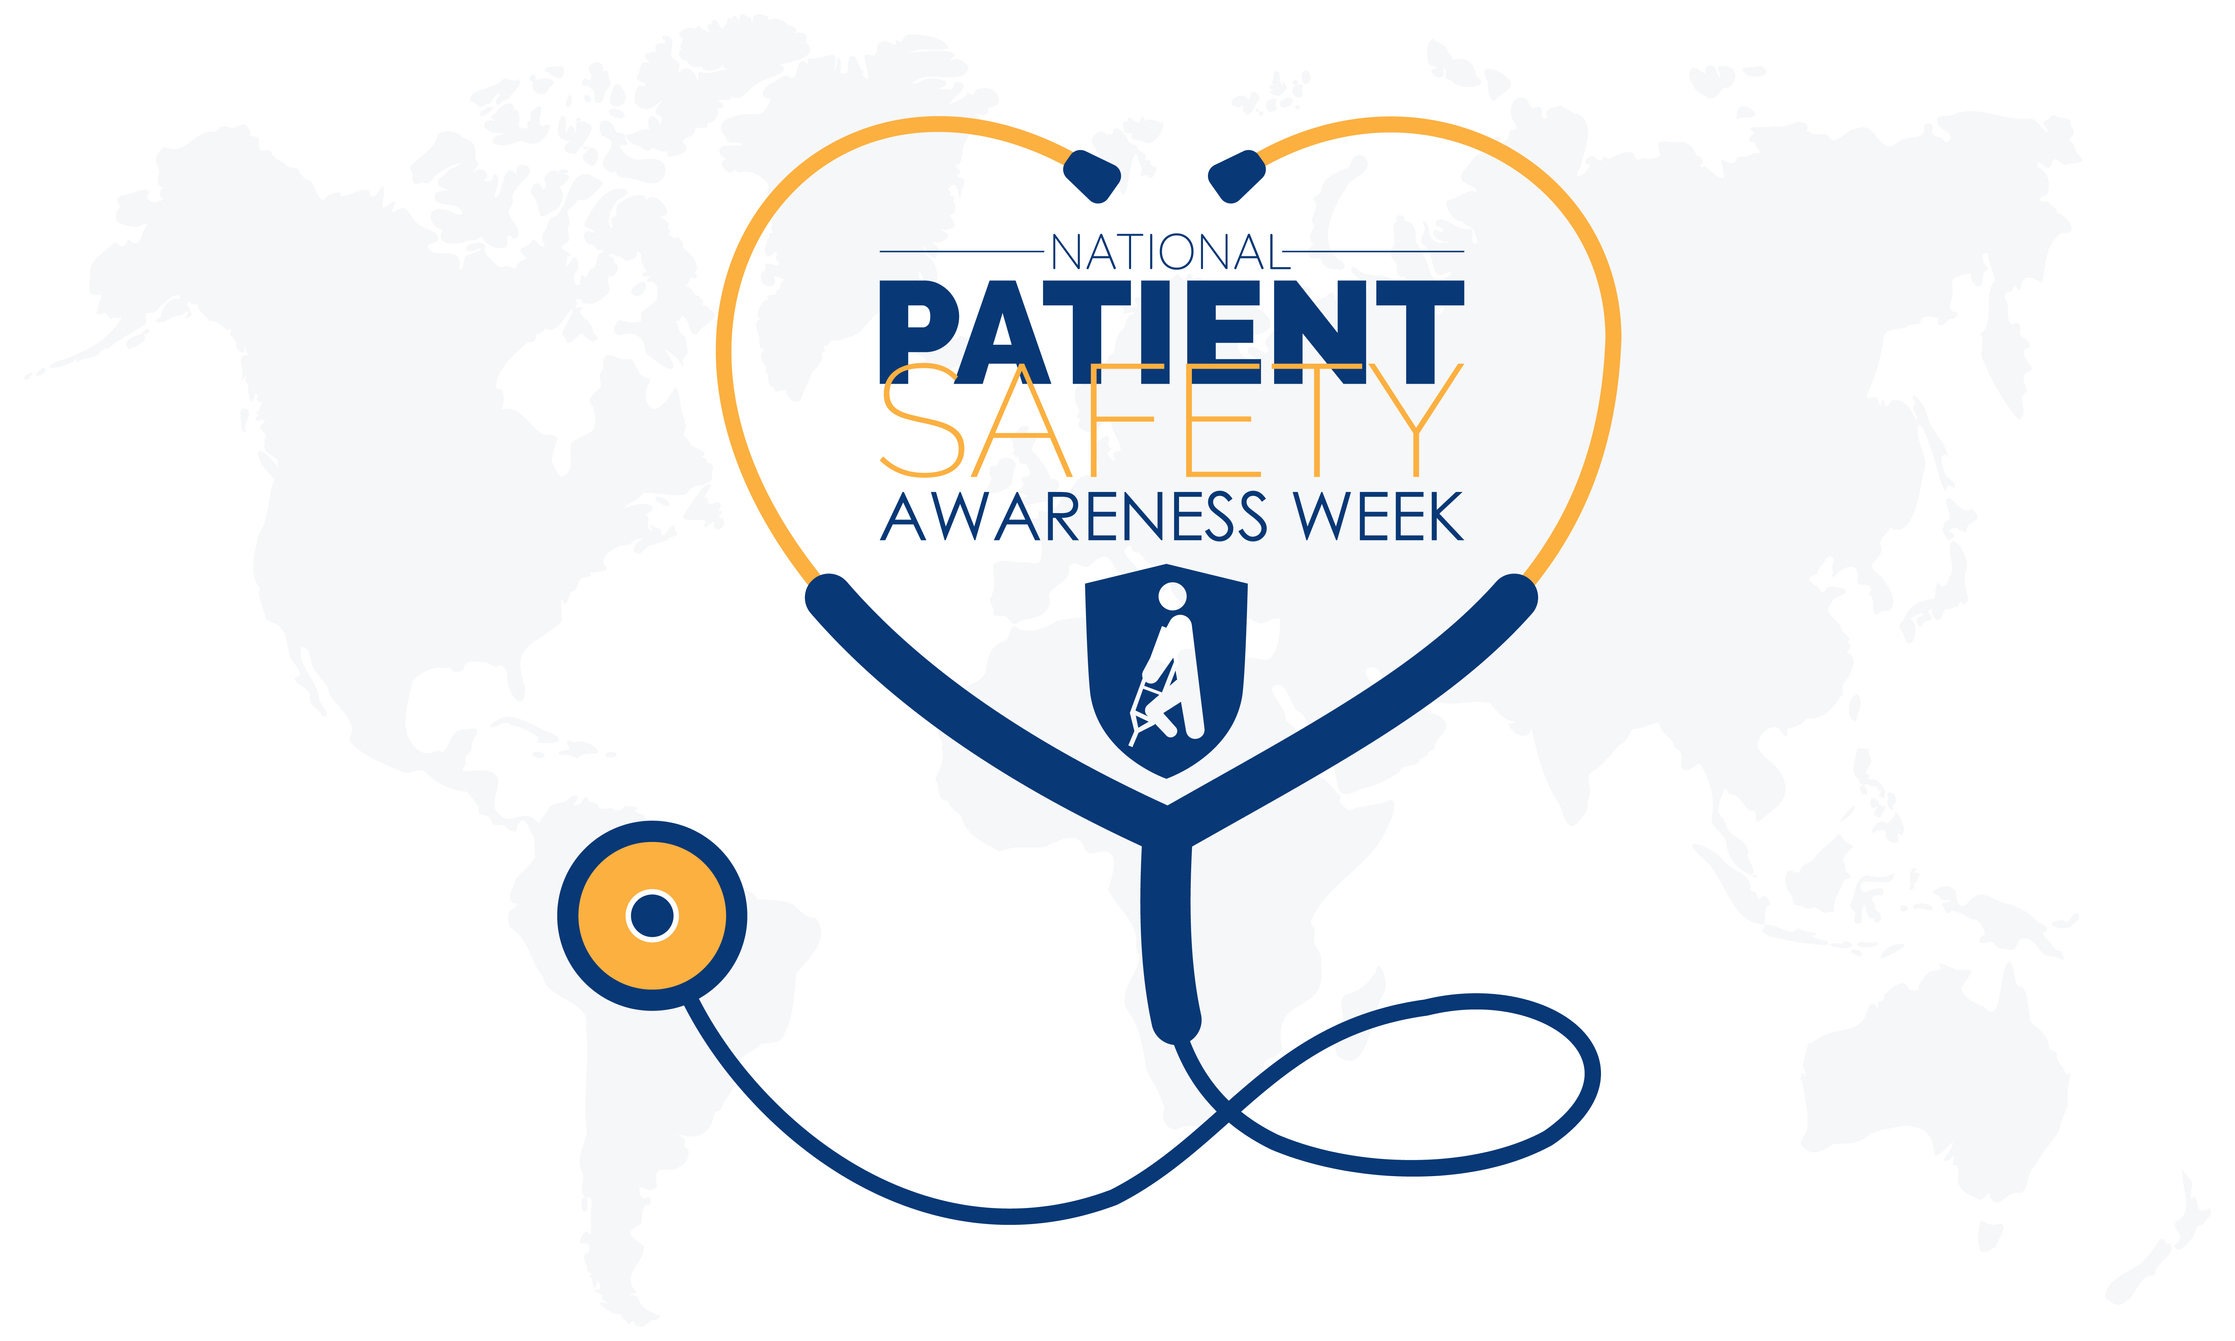 National Patient Safety Awareness Week